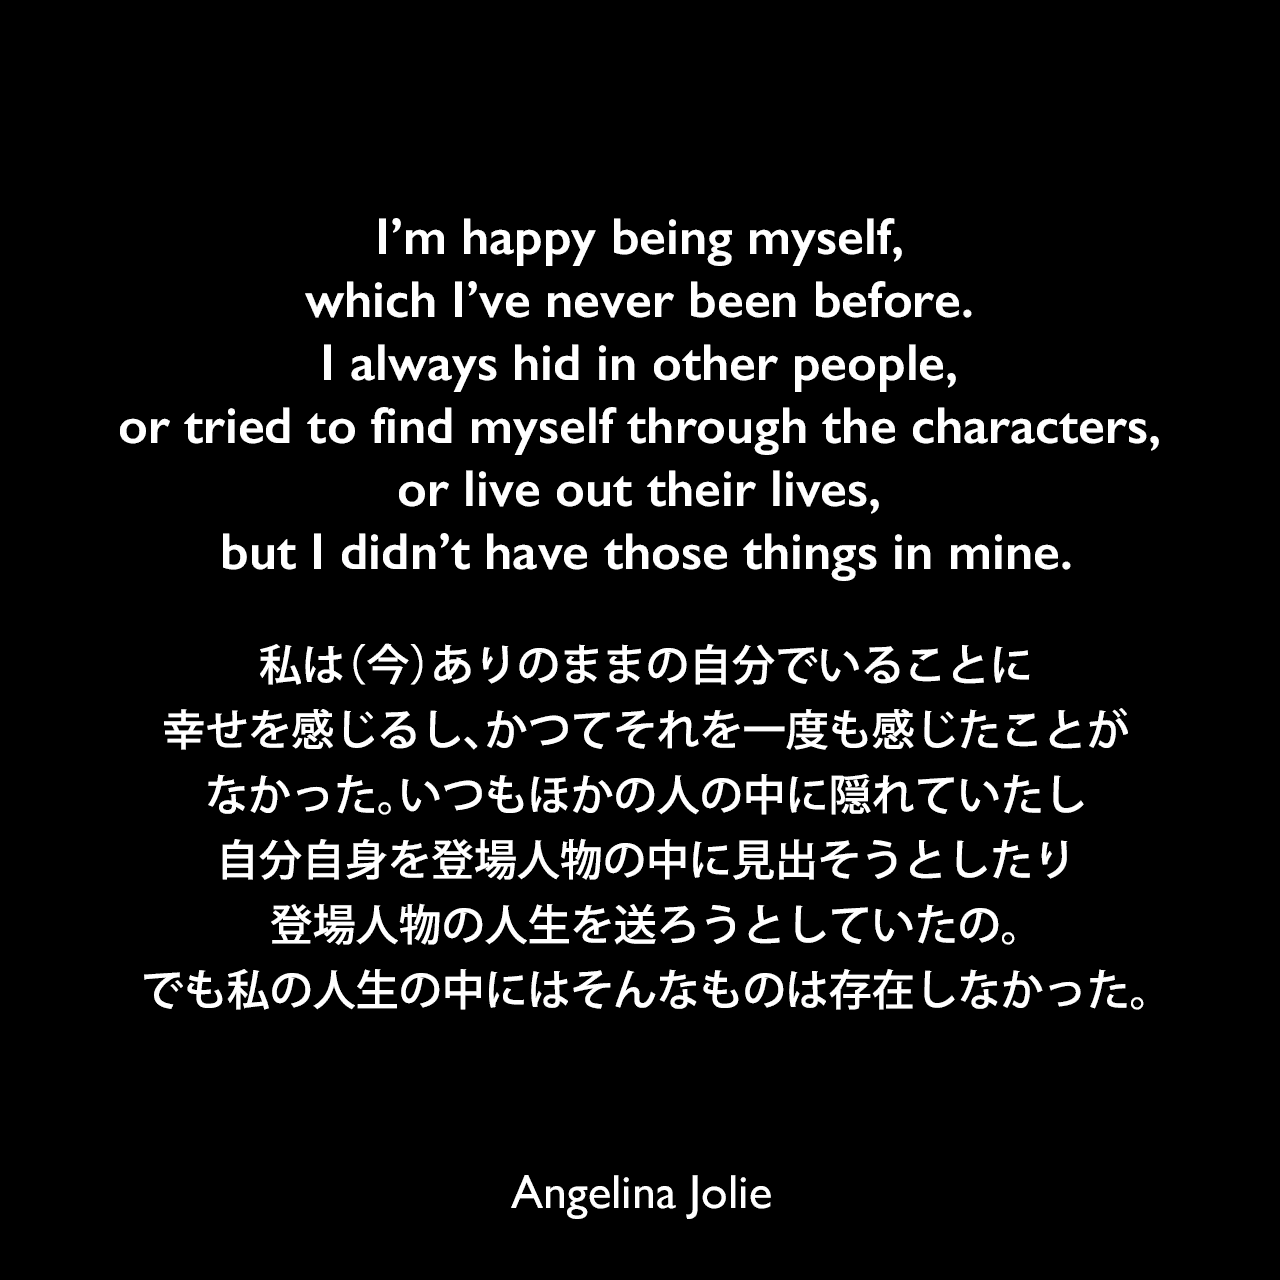 I’m happy being myself, which I’ve never been before. I always hid in other people, or tried to find myself through the characters, or live out their lives, but I didn’t have those things in mine.私は（今）ありのままの自分でいることに幸せを感じるし、かつてそれを一度も感じたことがなかった。いつもほかの人の中に隠れていたし、自分自身を登場人物の中に見出そうとしたり、登場人物の人生を送ろうとしていたの。でも私の人生の中にはそんなものは存在しなかった。Angelina Jolie